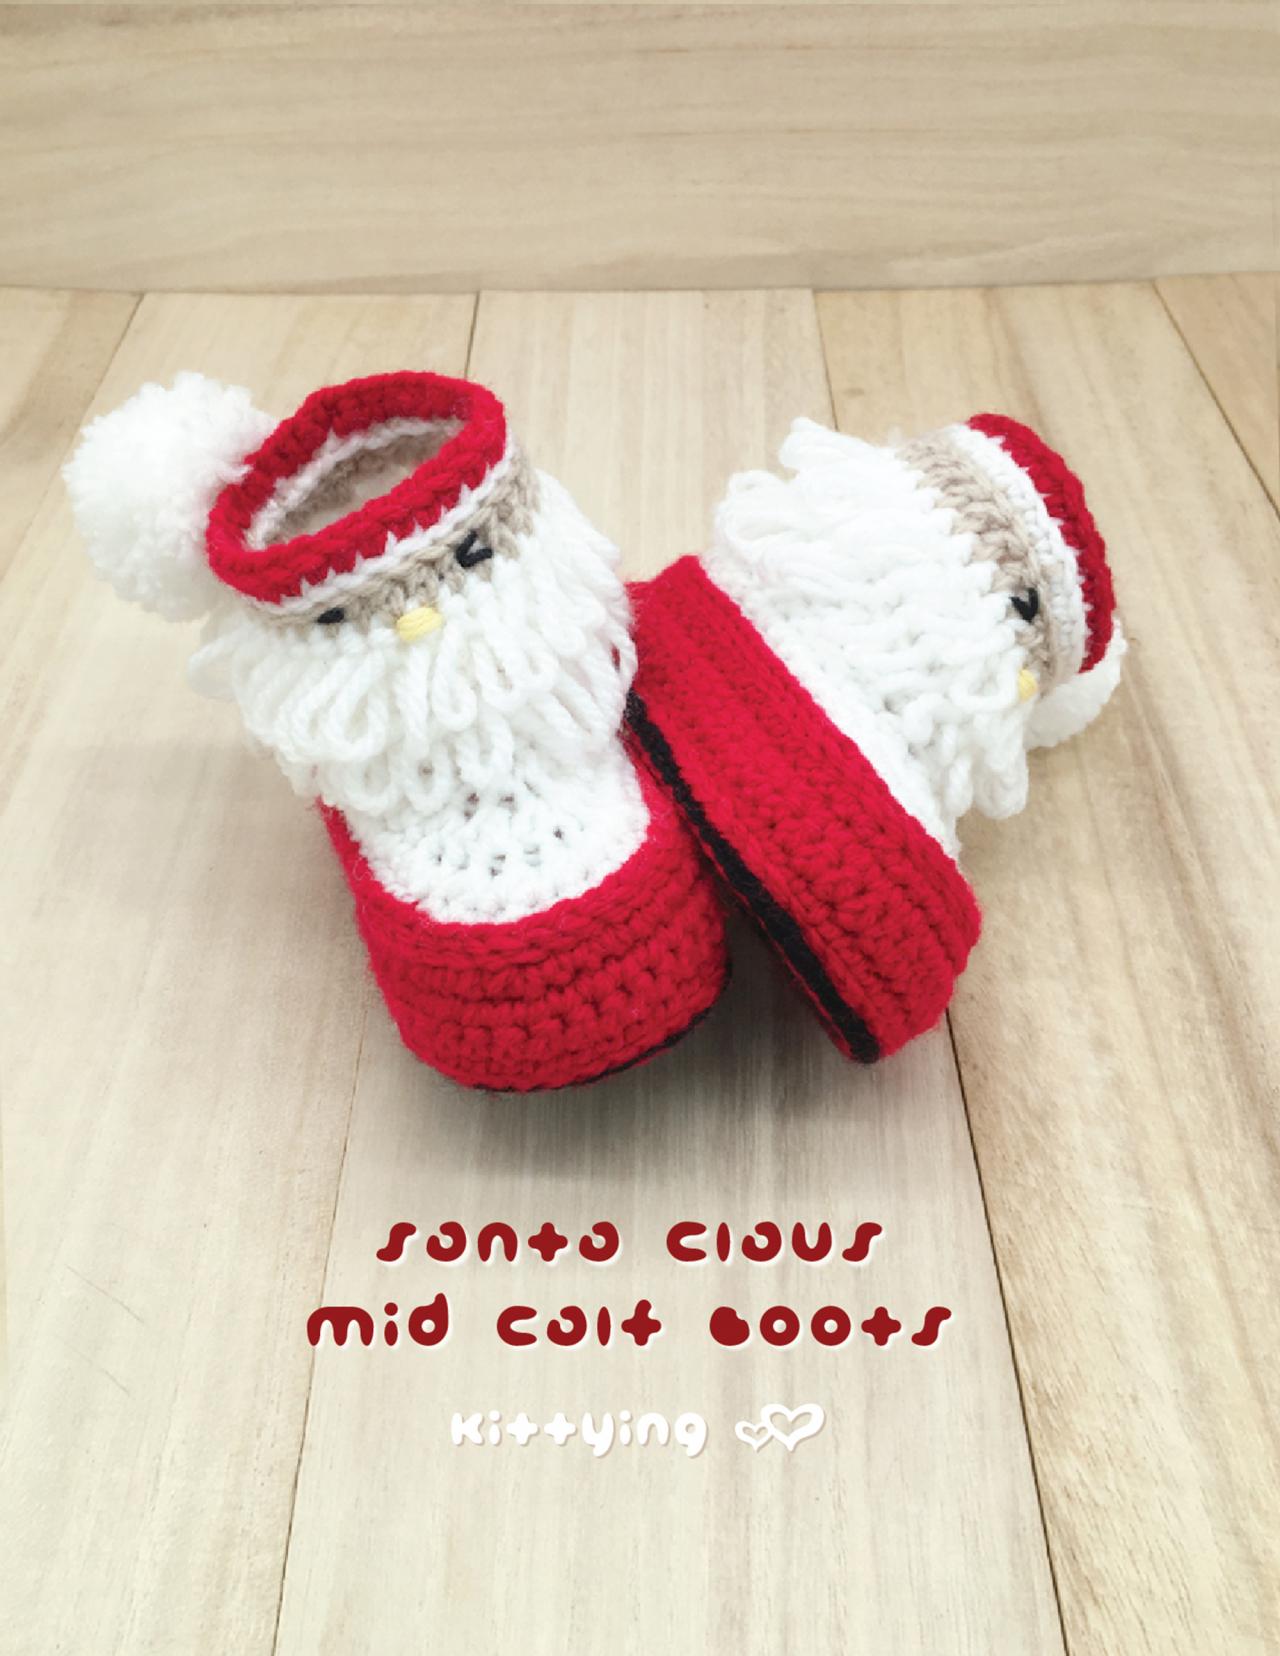 Baby Boots Crochet PATTERN - Newborn Baby Booties Crochet Pattern - Santa Mid Calf Toddler Shoes - Christmas Holiday by Kittying